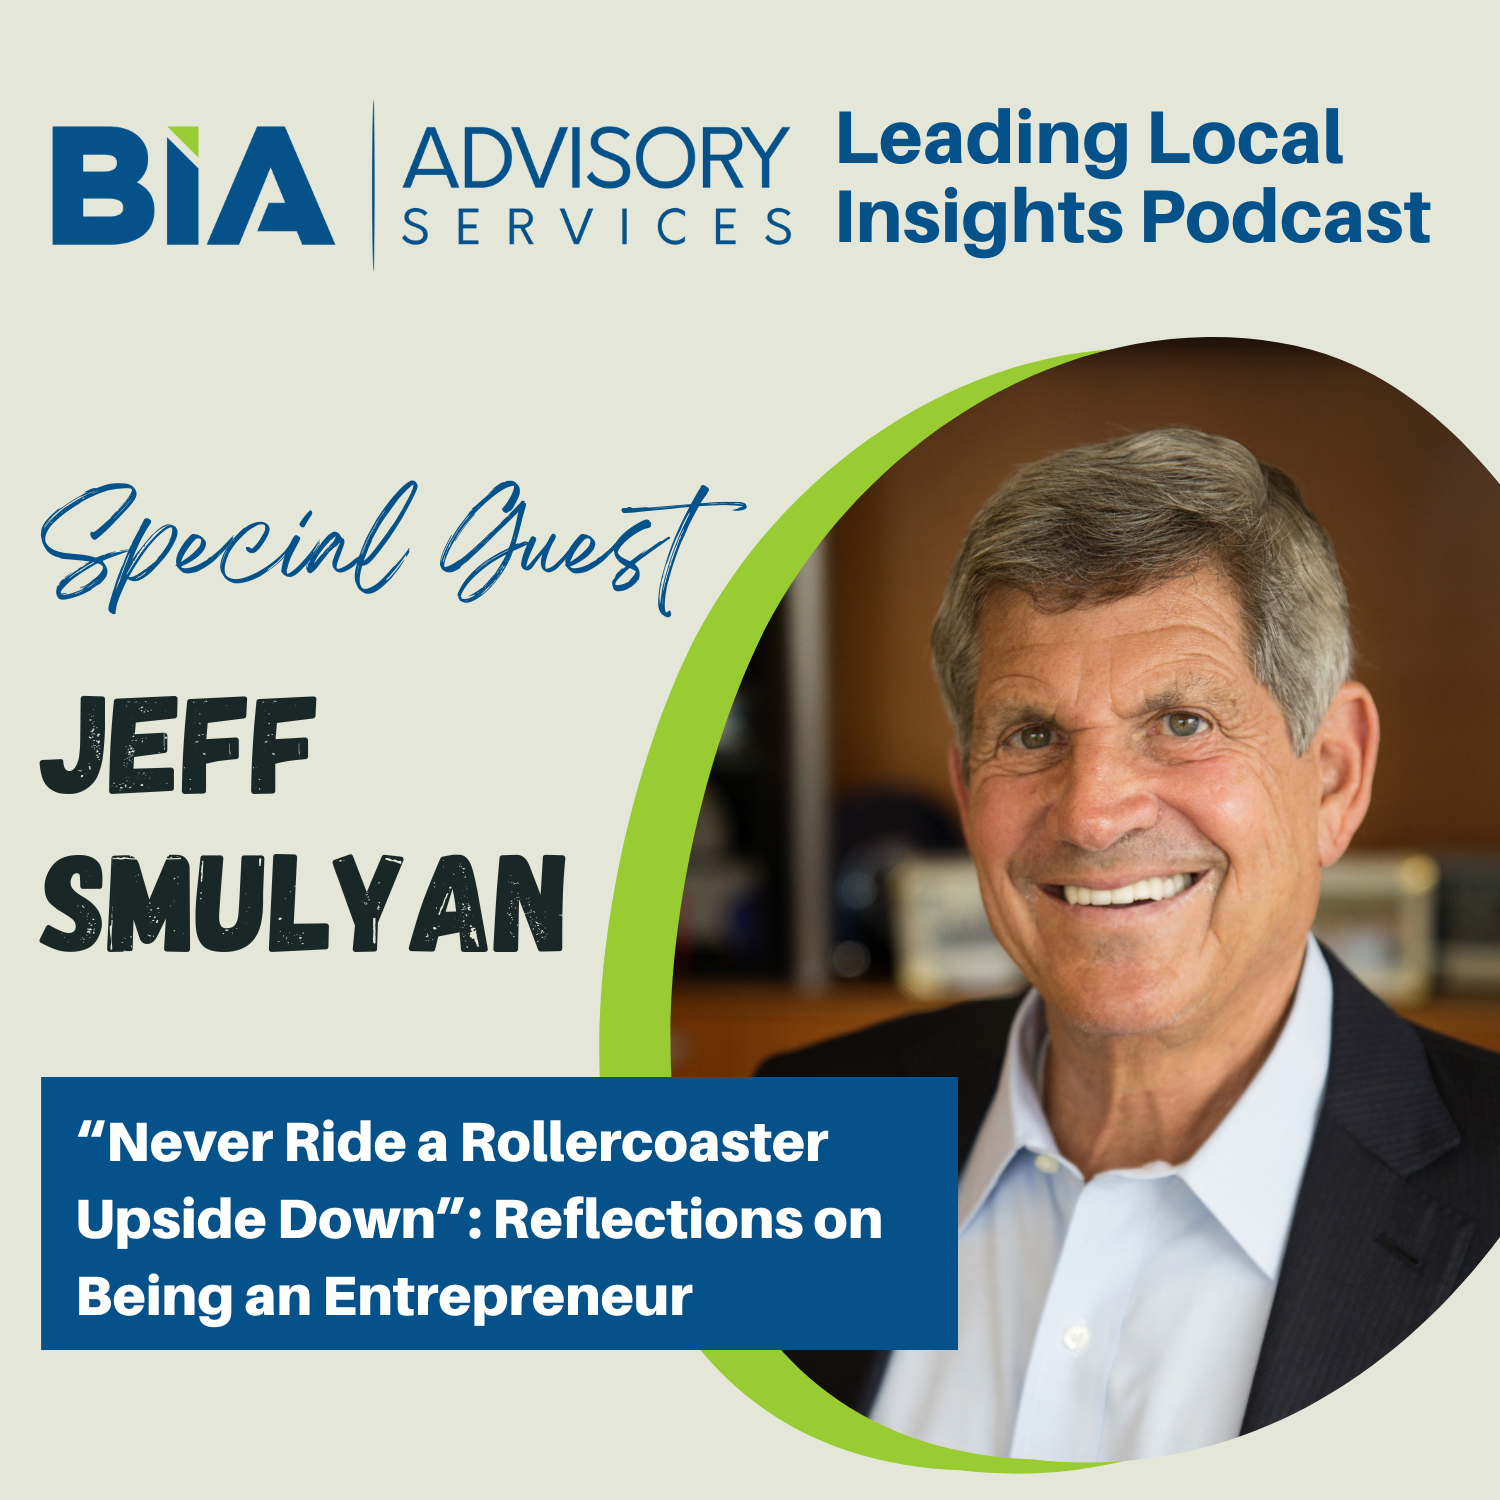 Leading Local Insights Podcast: “Never Ride A Rollercoaster Upside Down”: Reflections On Being An Entrepreneur With Jeff Smulyan